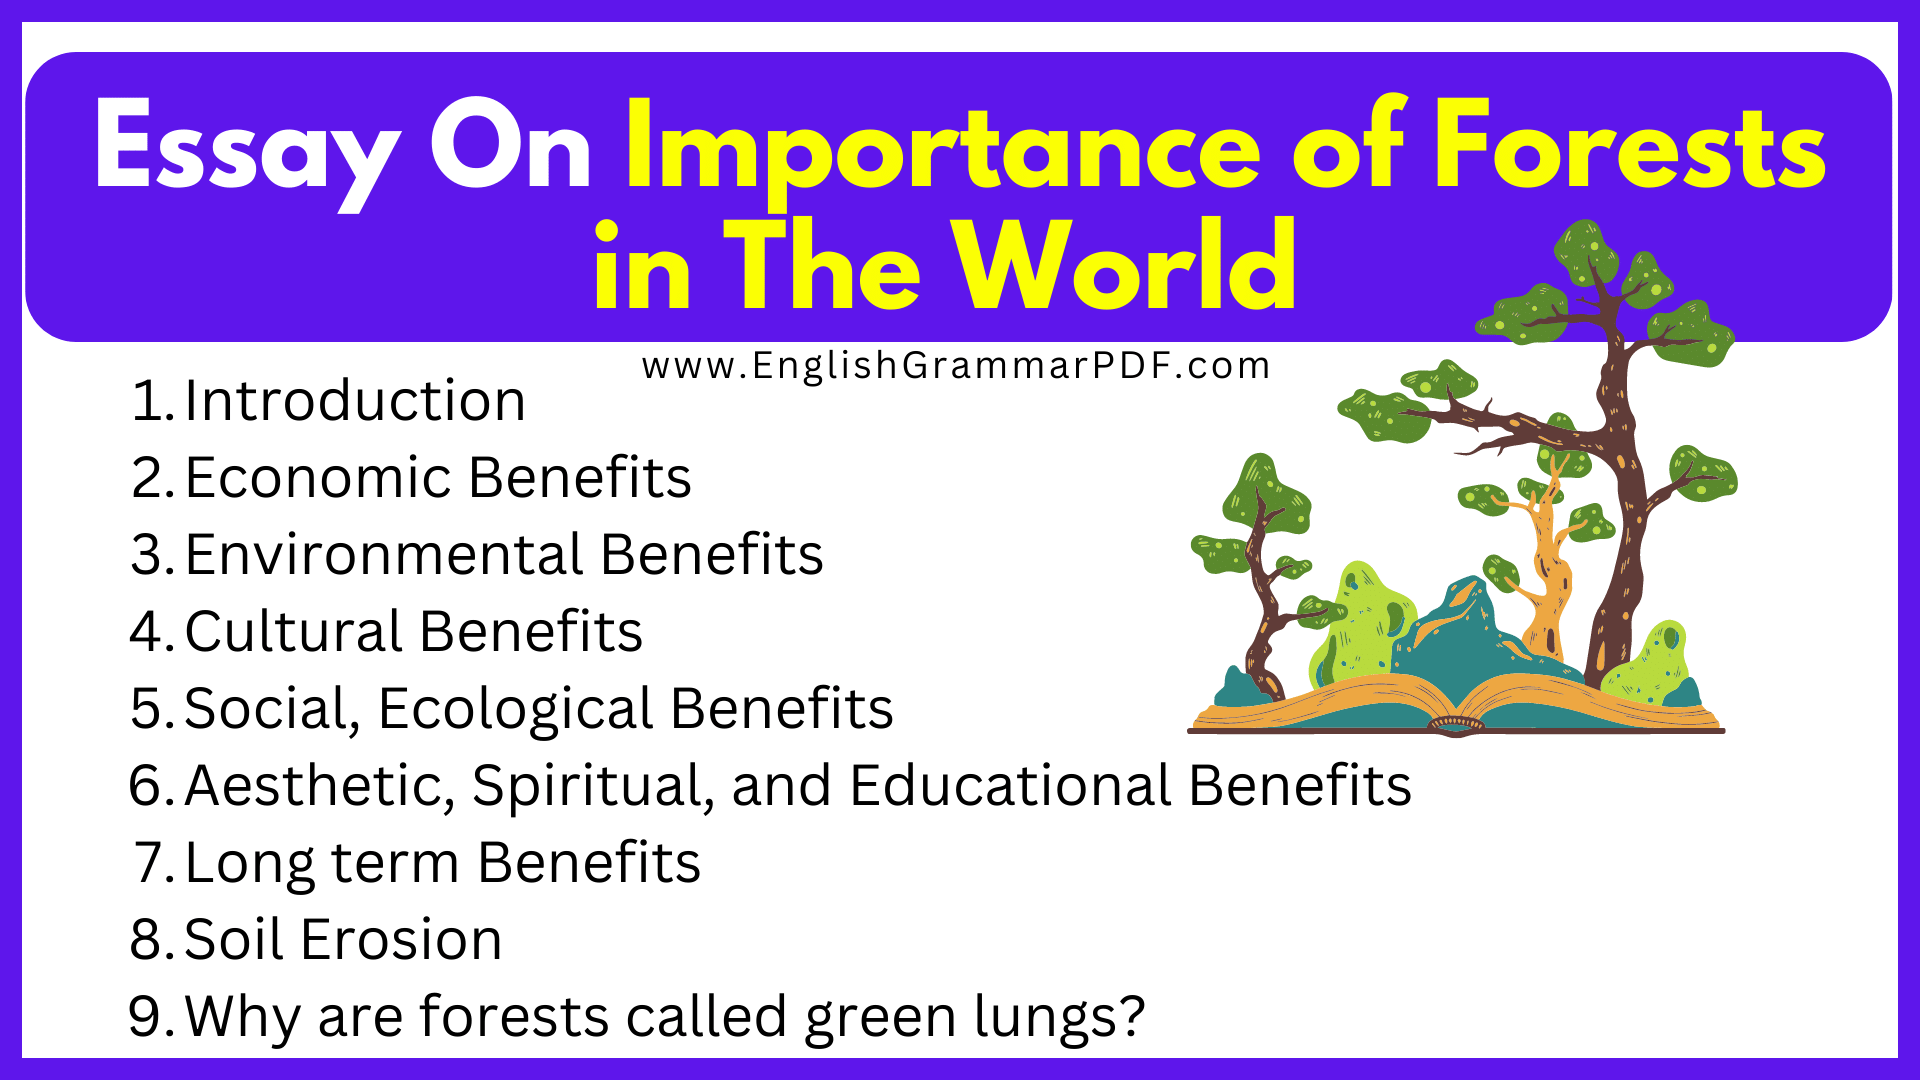 Essay On Importance of Forests in The World